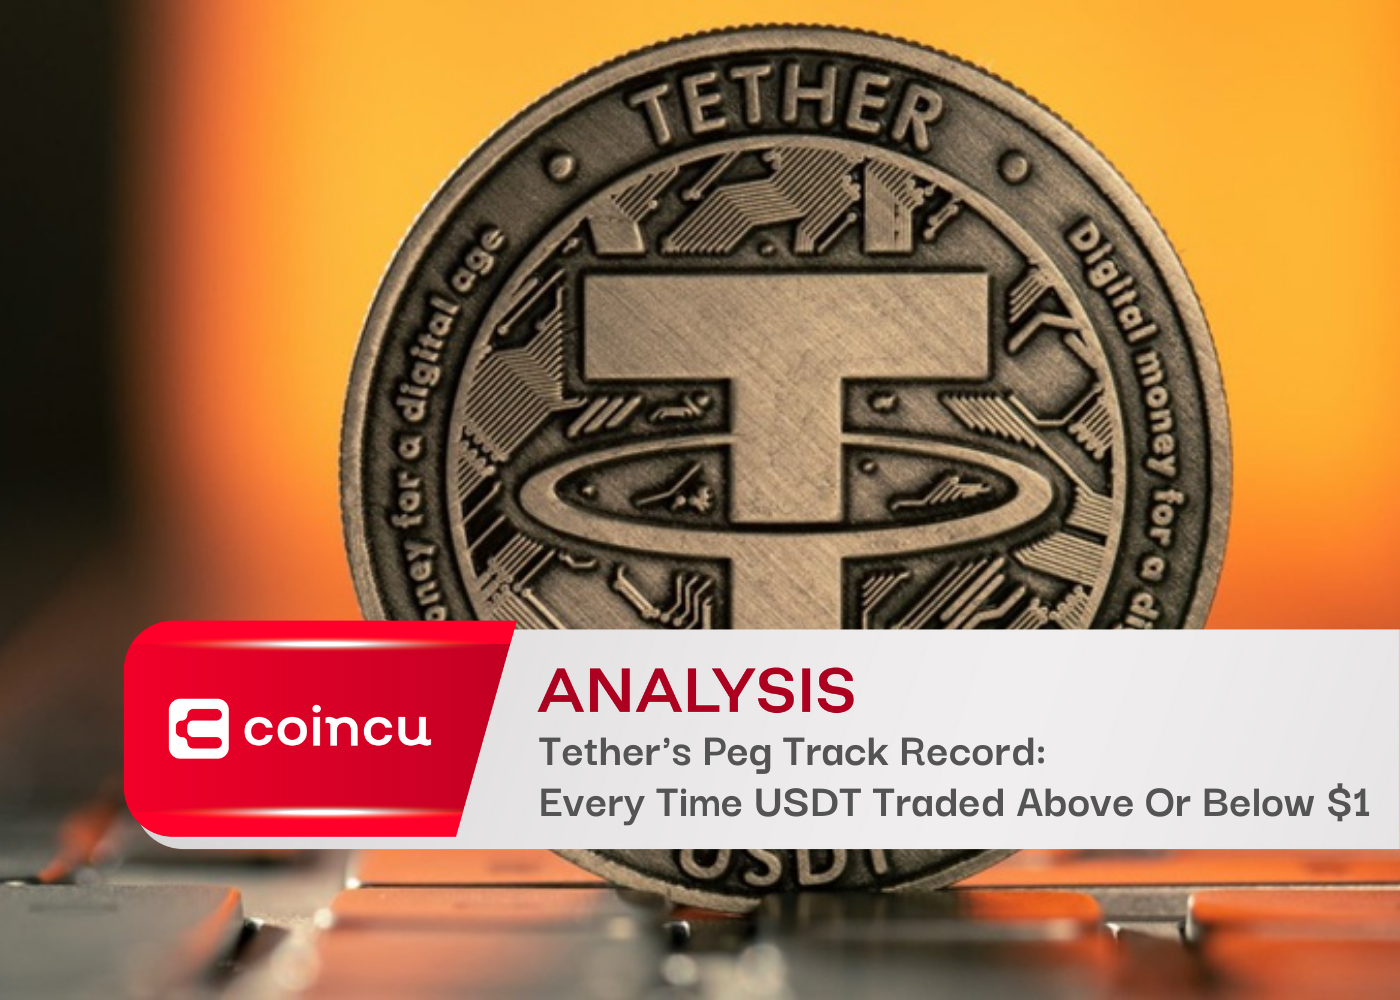 Tether's Peg Track Record: